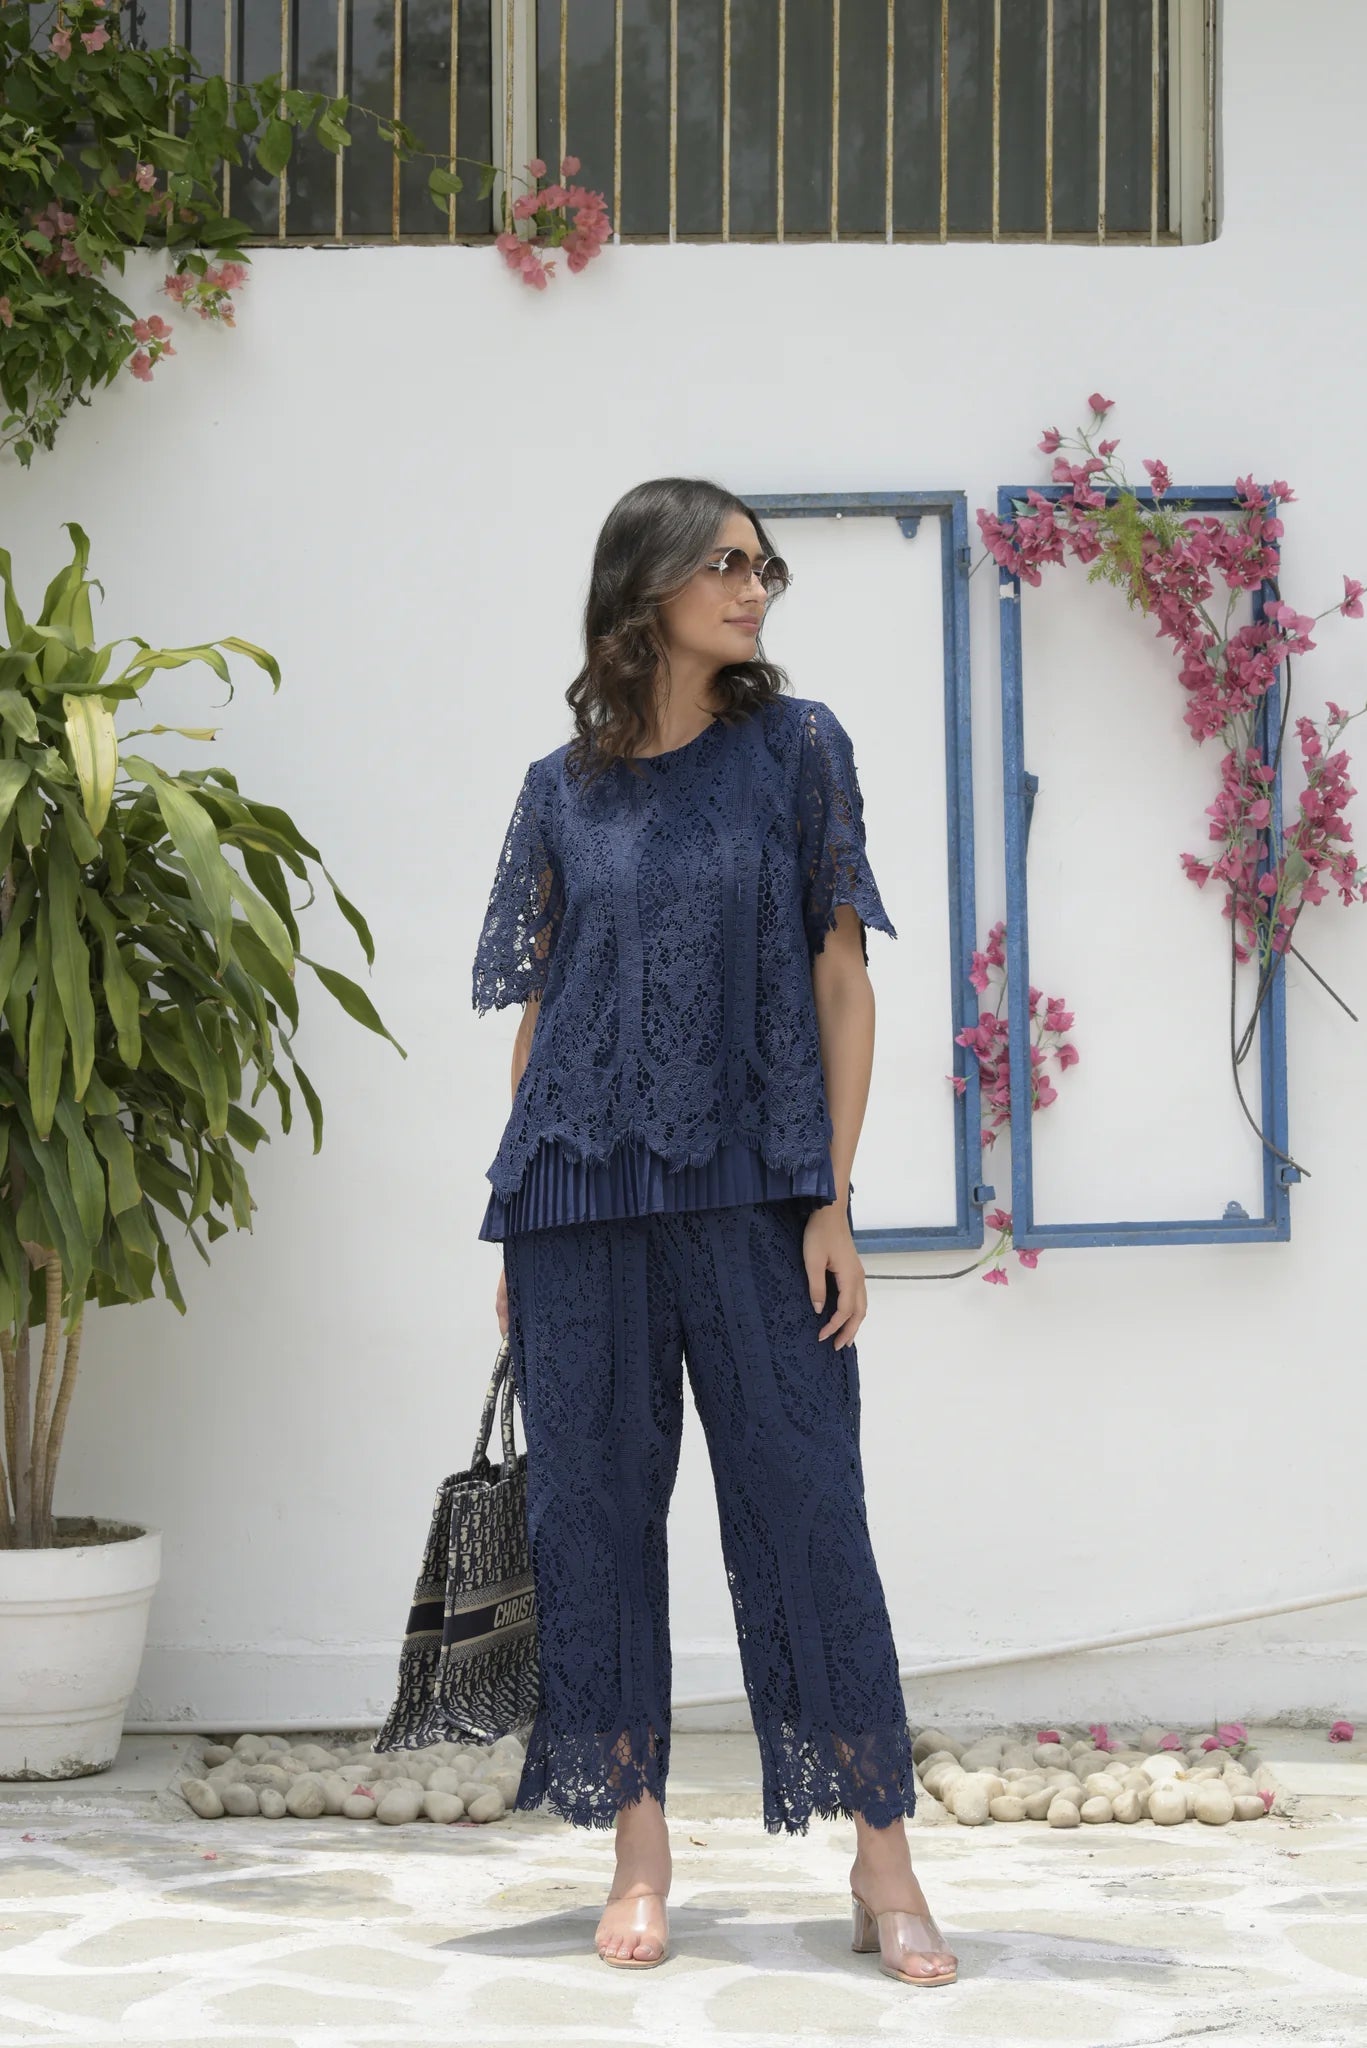 Image of Send subtle hints of elegance in the MYRA Mesh Cross Back Co-ord set. This two-piece set comes in a midnight blue color, and features a delicate mesh cross-back for a subtle hint of sophistication. Enjoy the perfect mix of style and comfort with MYRA.  From savoirfashions.com